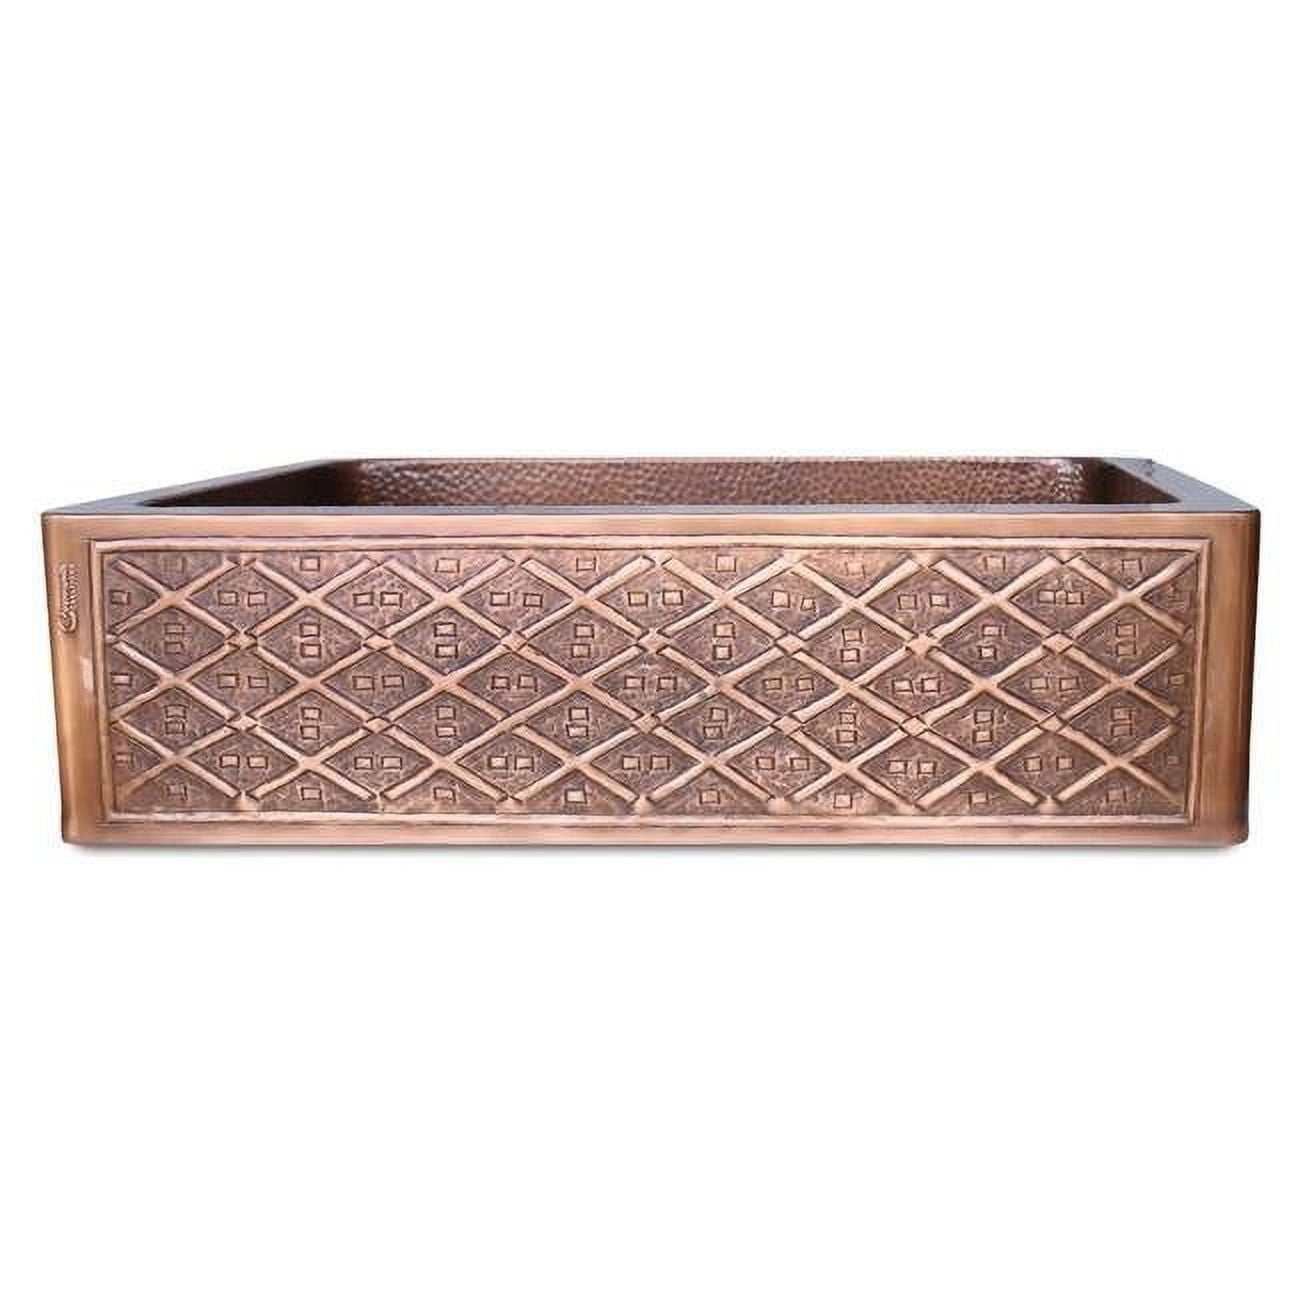 CKSSBTSOSFA33.22.9 Single Bowl Two Squares in one Square Pattern Front Apron Antique Copper Kitchen Sink -  Coppersmith Creations